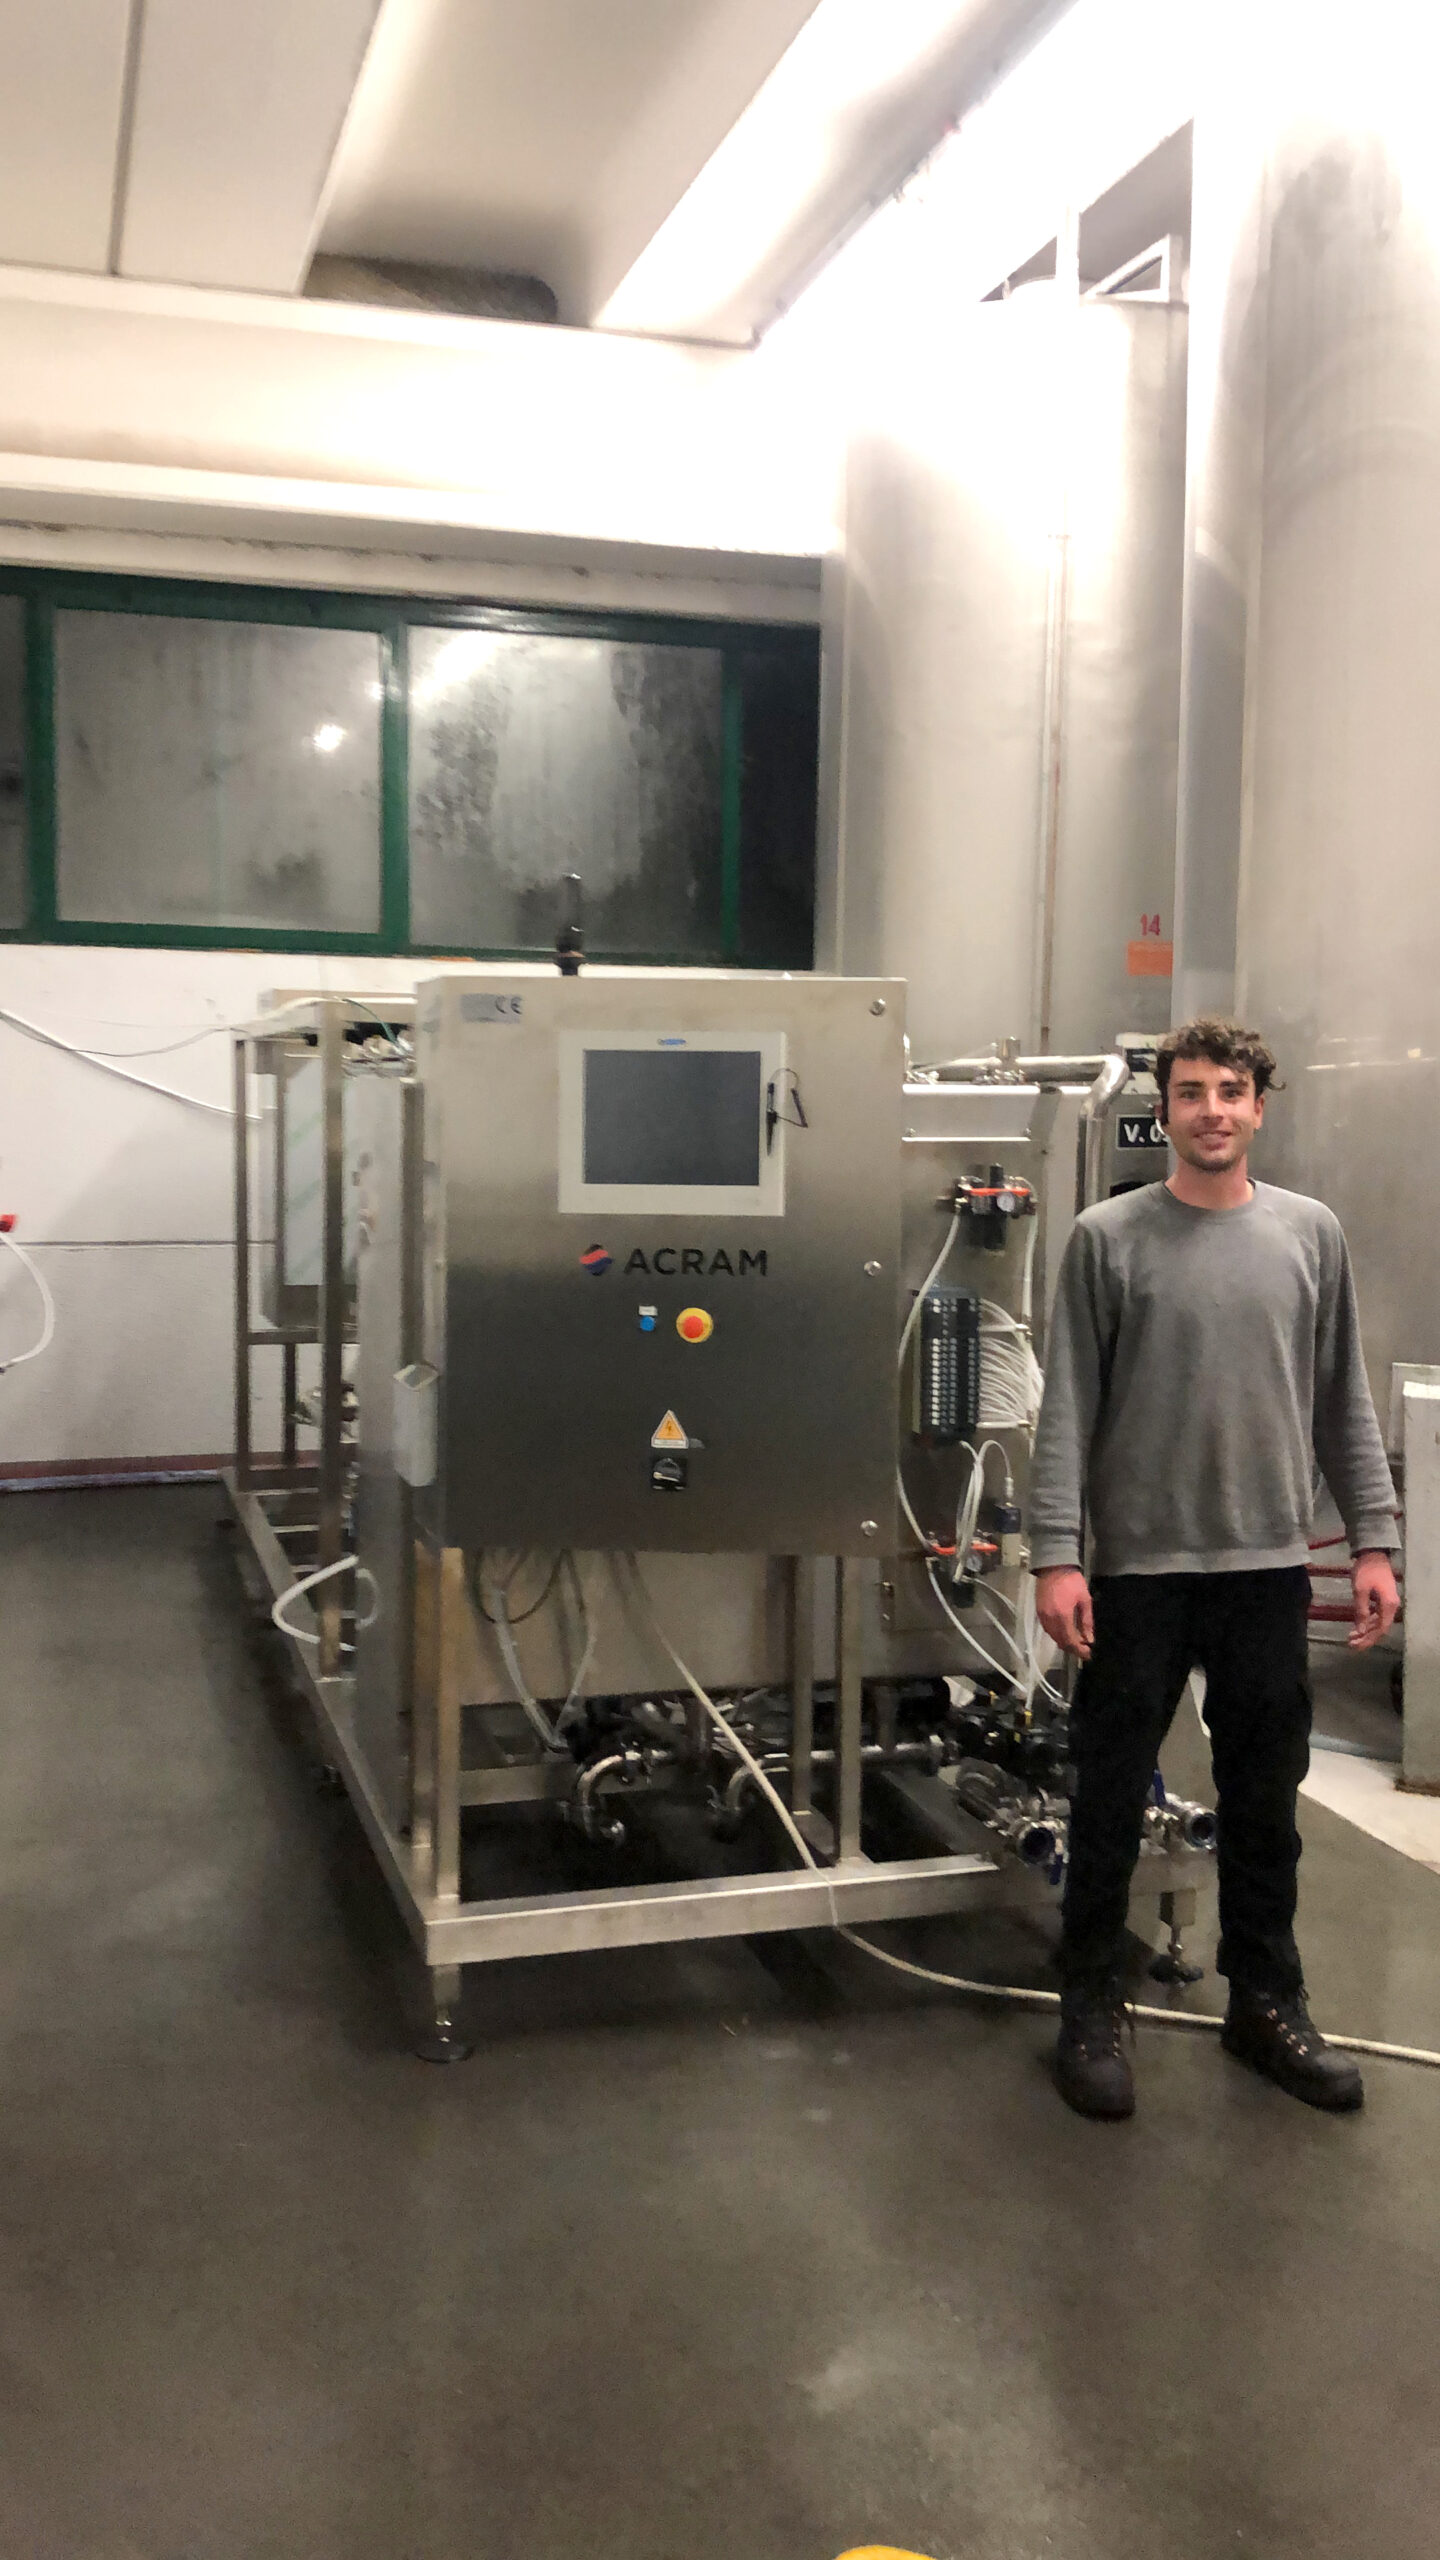 Dealcohol system operating at the Princess srl winery - ACRAM